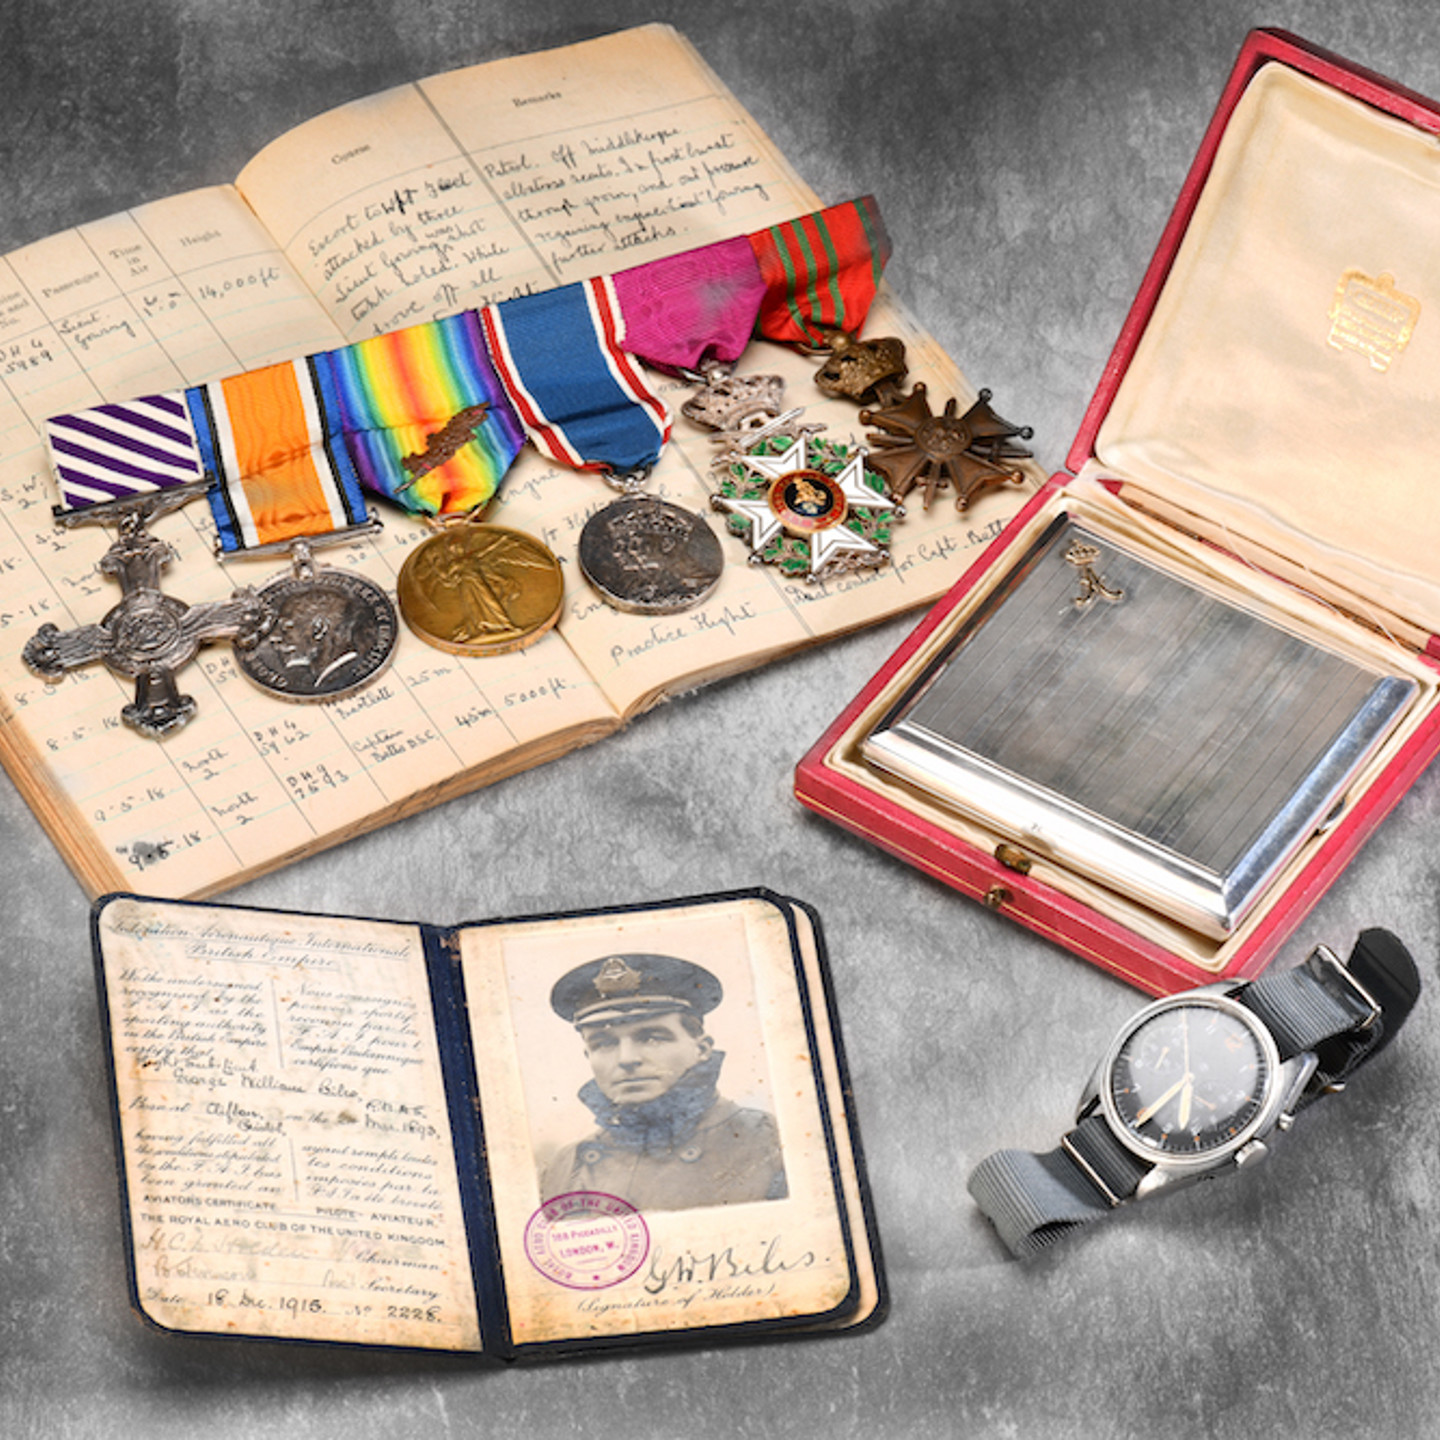 Royal Air Force Royal Flying Corps WWI Distinguished Flying Cross (DFC) Medal Group With Associated Documentation, Log Books, Ephemera And Personal Effect Sold 18,500